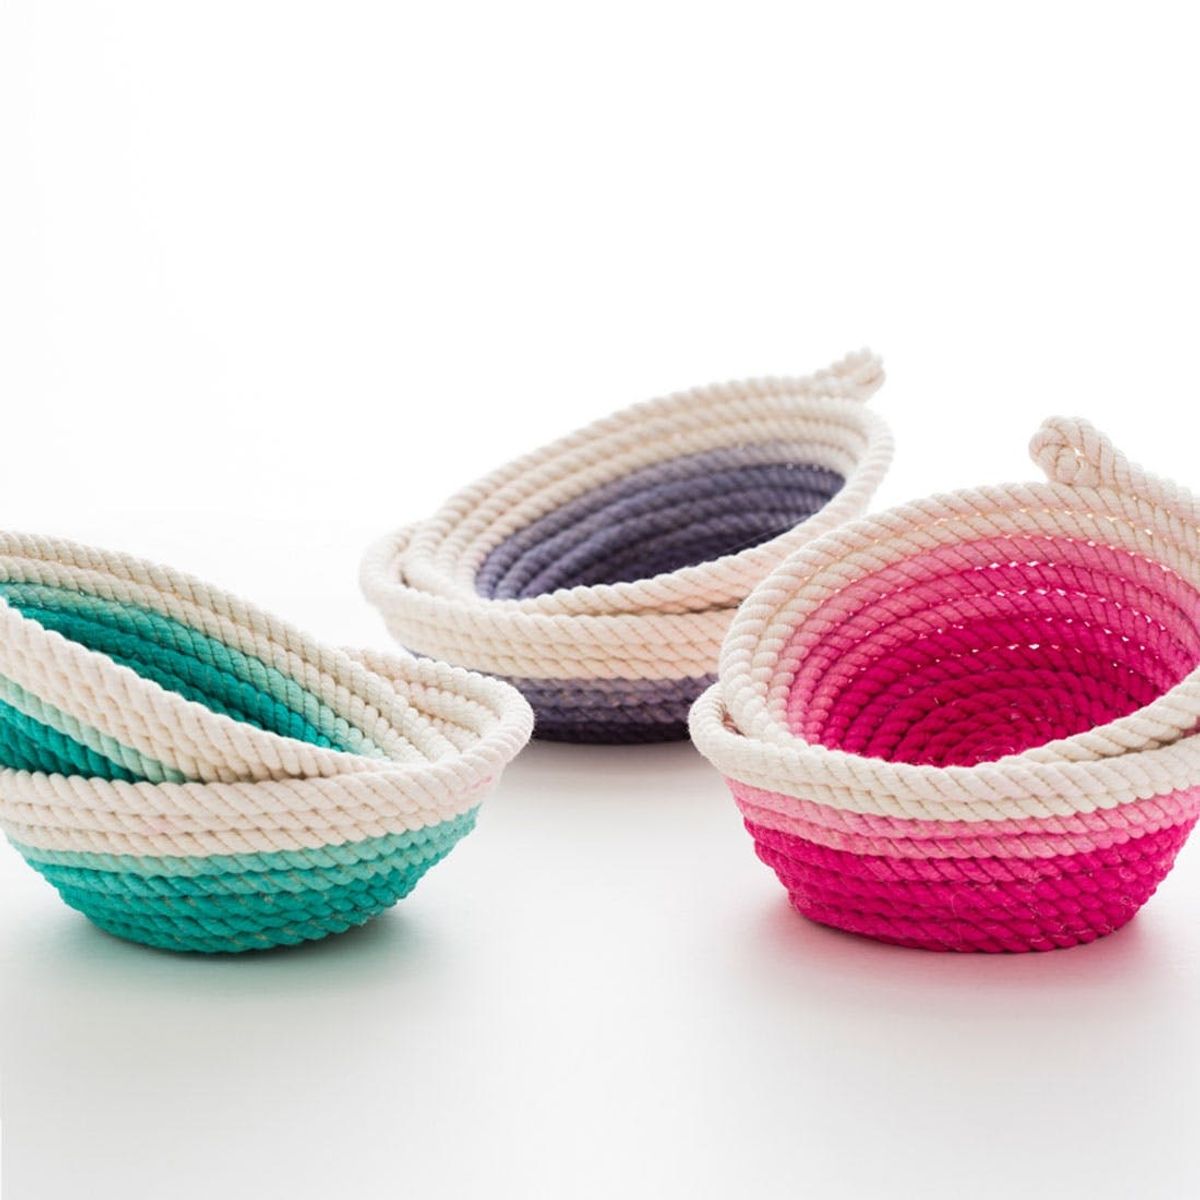 How to Make Beautiful No-Sew Rope Bowls